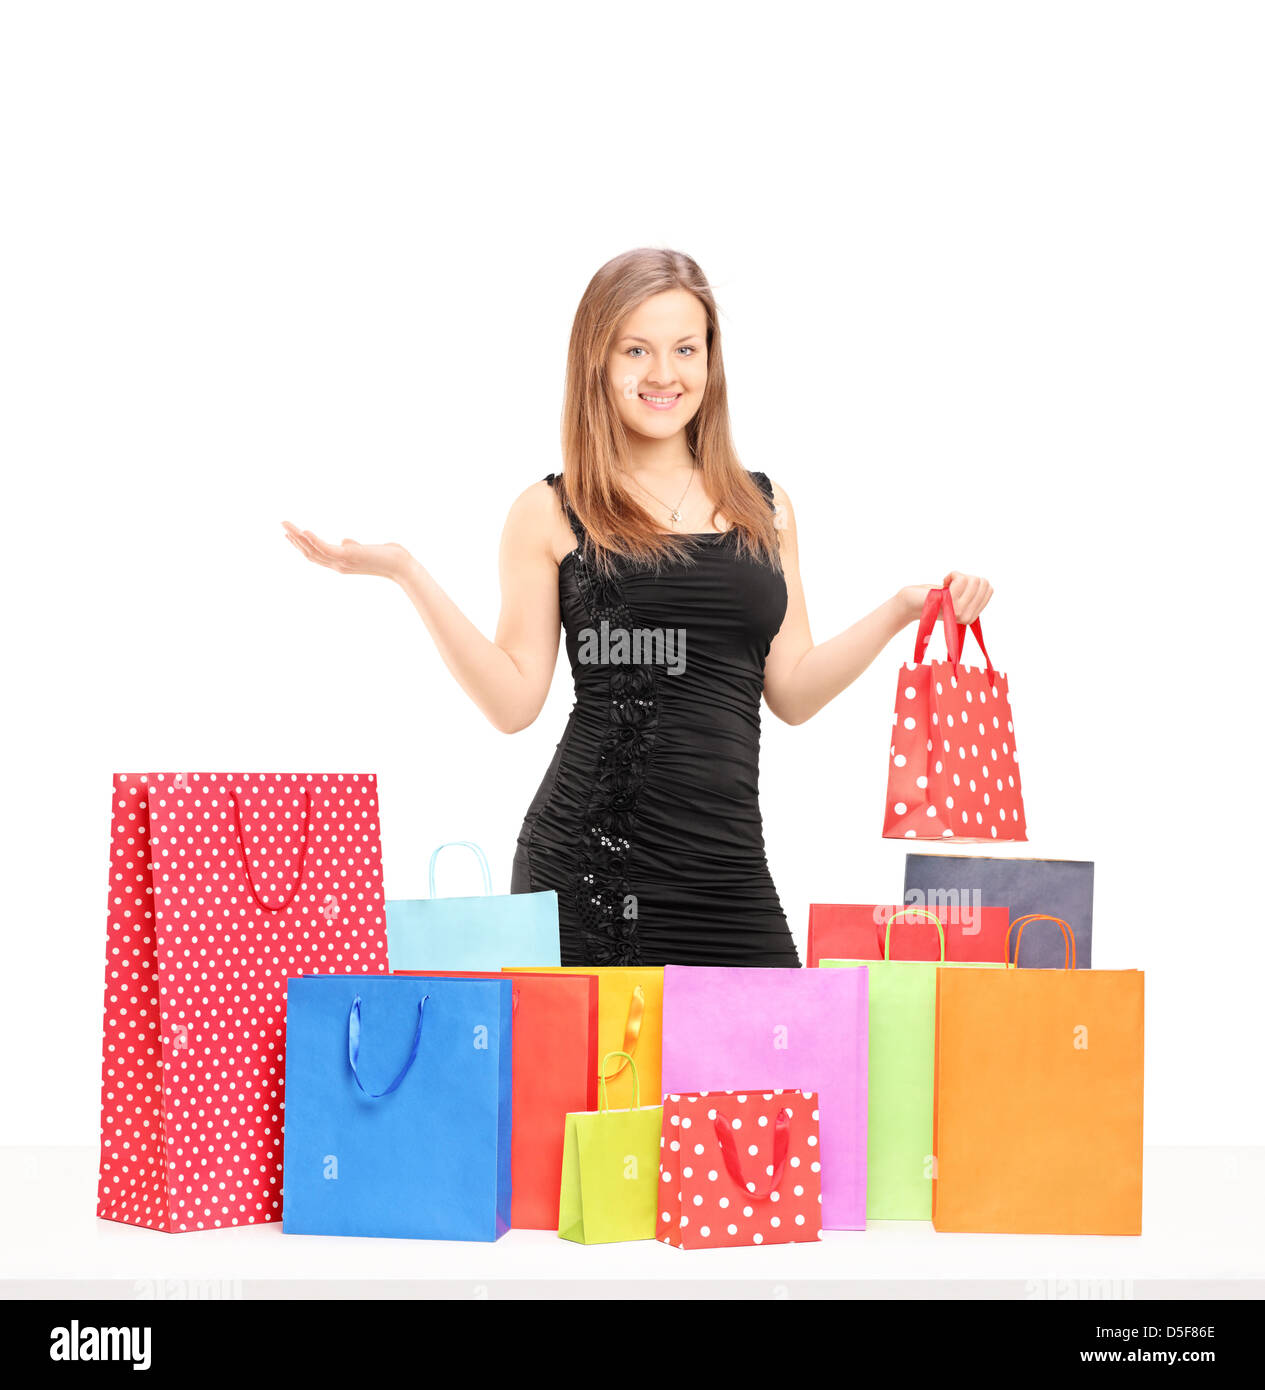 Beautiful young female holding a present and posing with shopping bags on a table isolated on white background Stock Photo